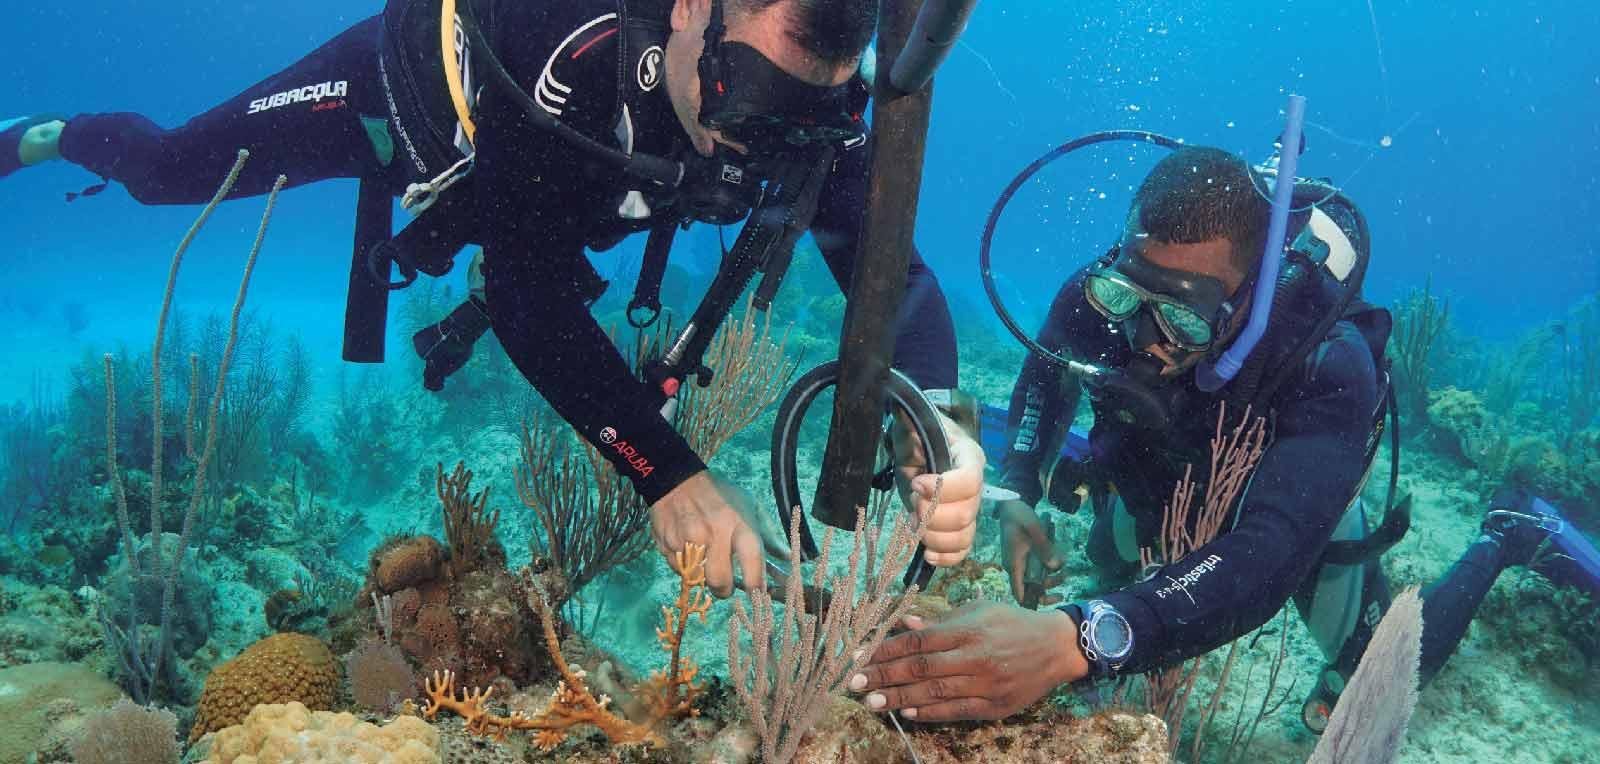 Planting corals, an important contribution to the life of the planet